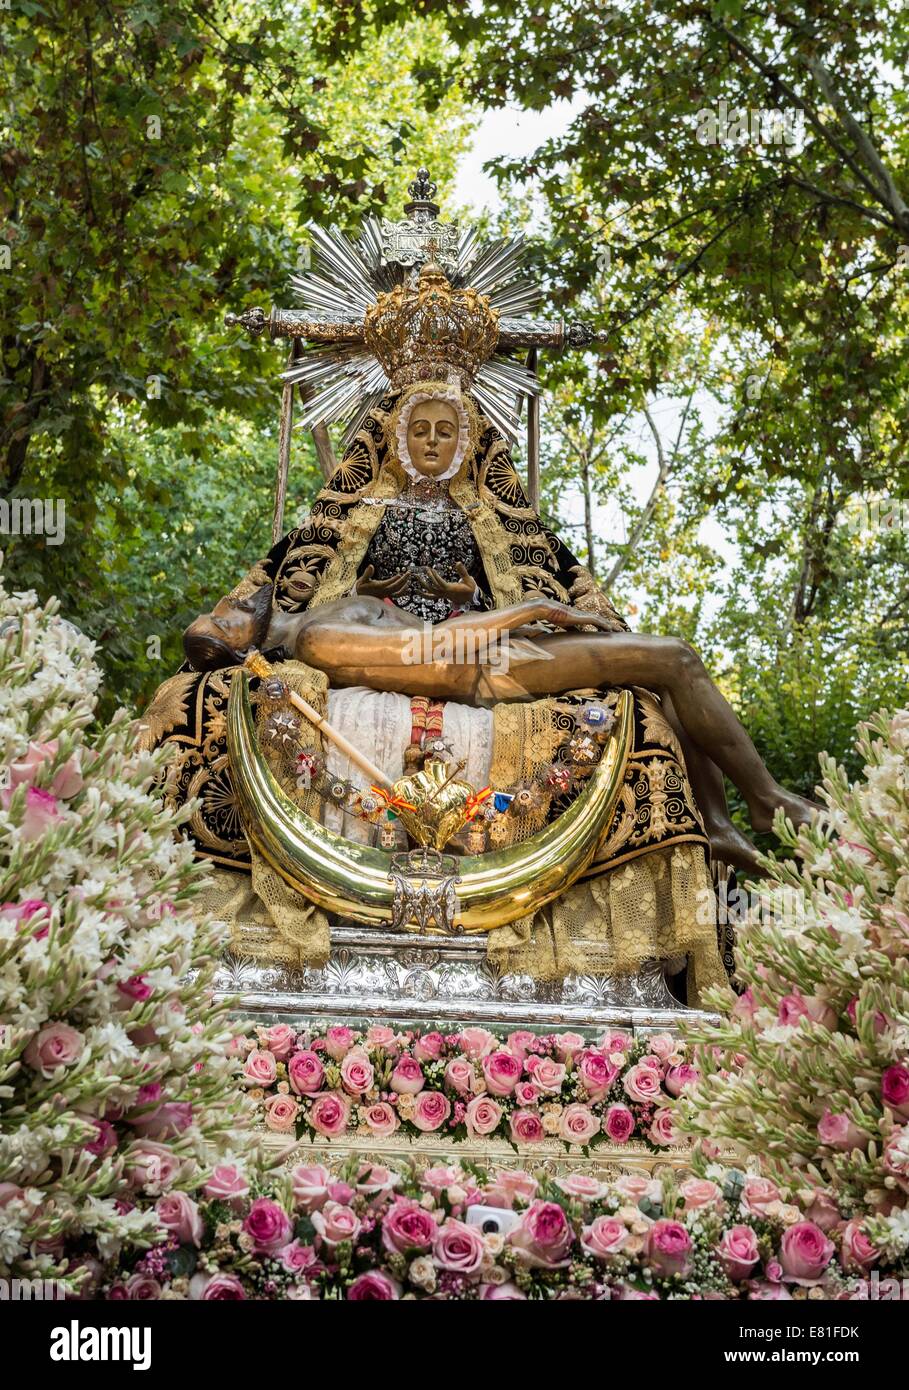 Granada, Spain. 28th Sep, 2014. Procession of la patrona the virgin ''de las Angustias'' on 28.9.2014 in Granada - Spain .Every last Sunday of September, Granada ''“ Spain is hosting its annual festival for its patron, la virgin ''žde las Angustias' | Virgin of Anguish. Thousands of ''žla hermandad' the brotherhood carry the enormous statue oft he virgin on their shoulders, followed by representatives from communities, military, church and tourists in Granada. Credit:  Peter Bauza/ZUMA Wire/ZUMAPRESS.com/Alamy Live News Stock Photo